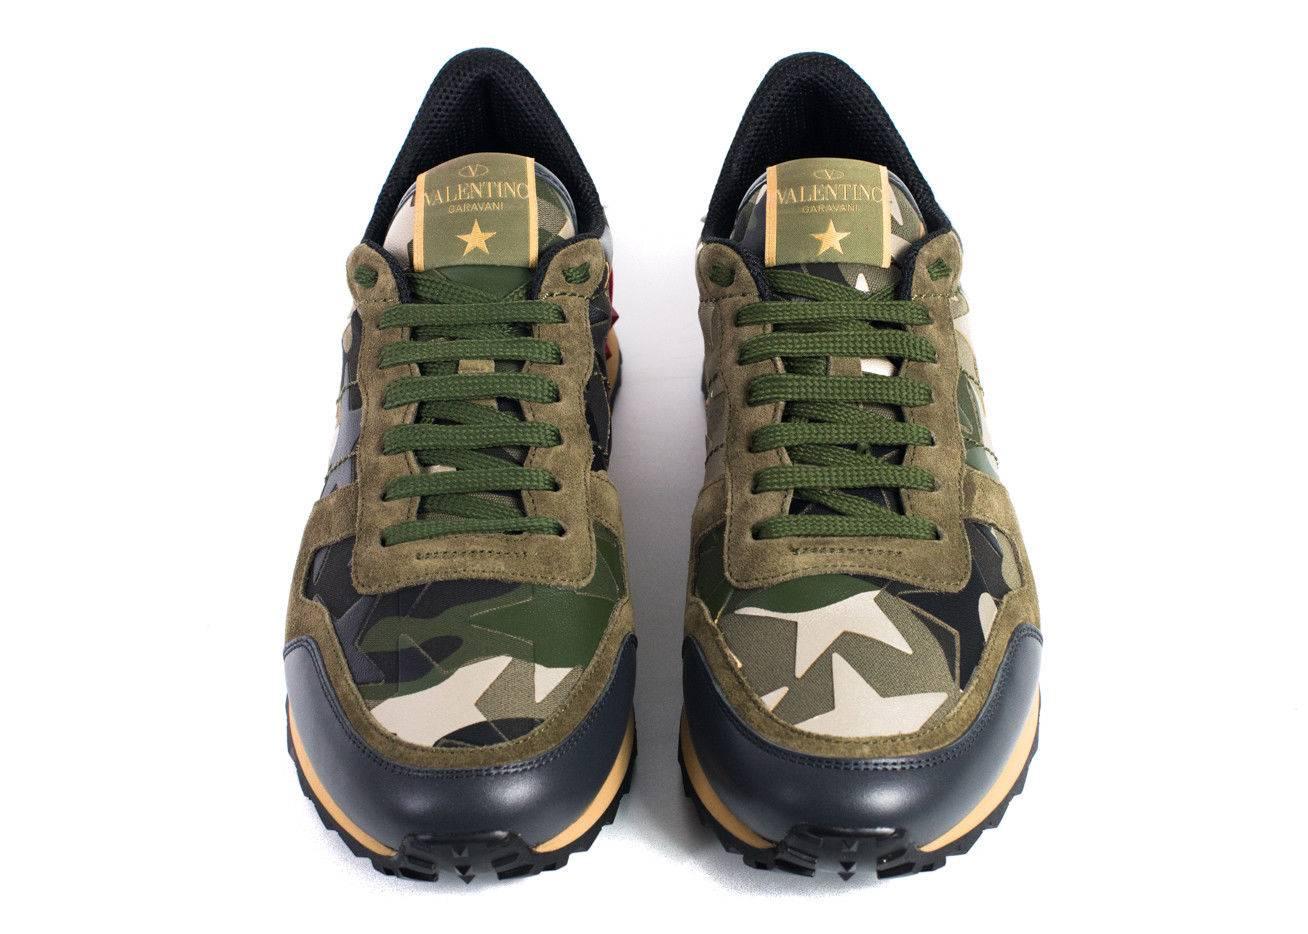 Brand New Valentino Camustar Rockrunner
Original Box & Dust Bag Included
Retails in Stores & Online for $895
Size IT40.5 / US7.5 Fits True to Size

Valentino's Rockrunner trainer sneakers with their signature 